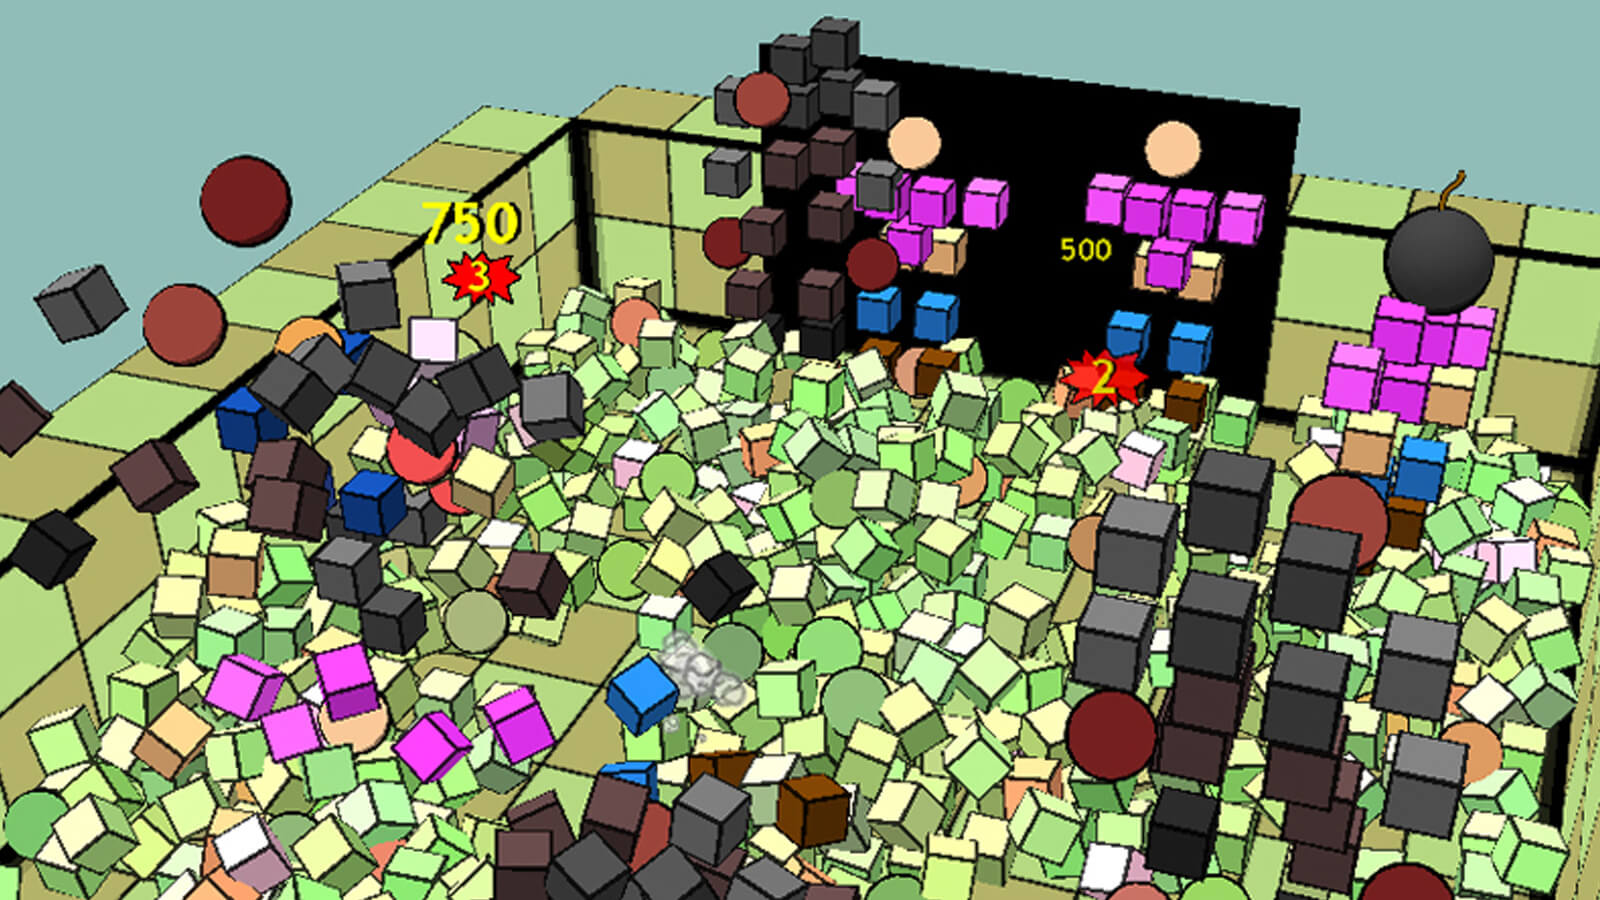 Waves of geometric people smash each other into blocks littering the room.